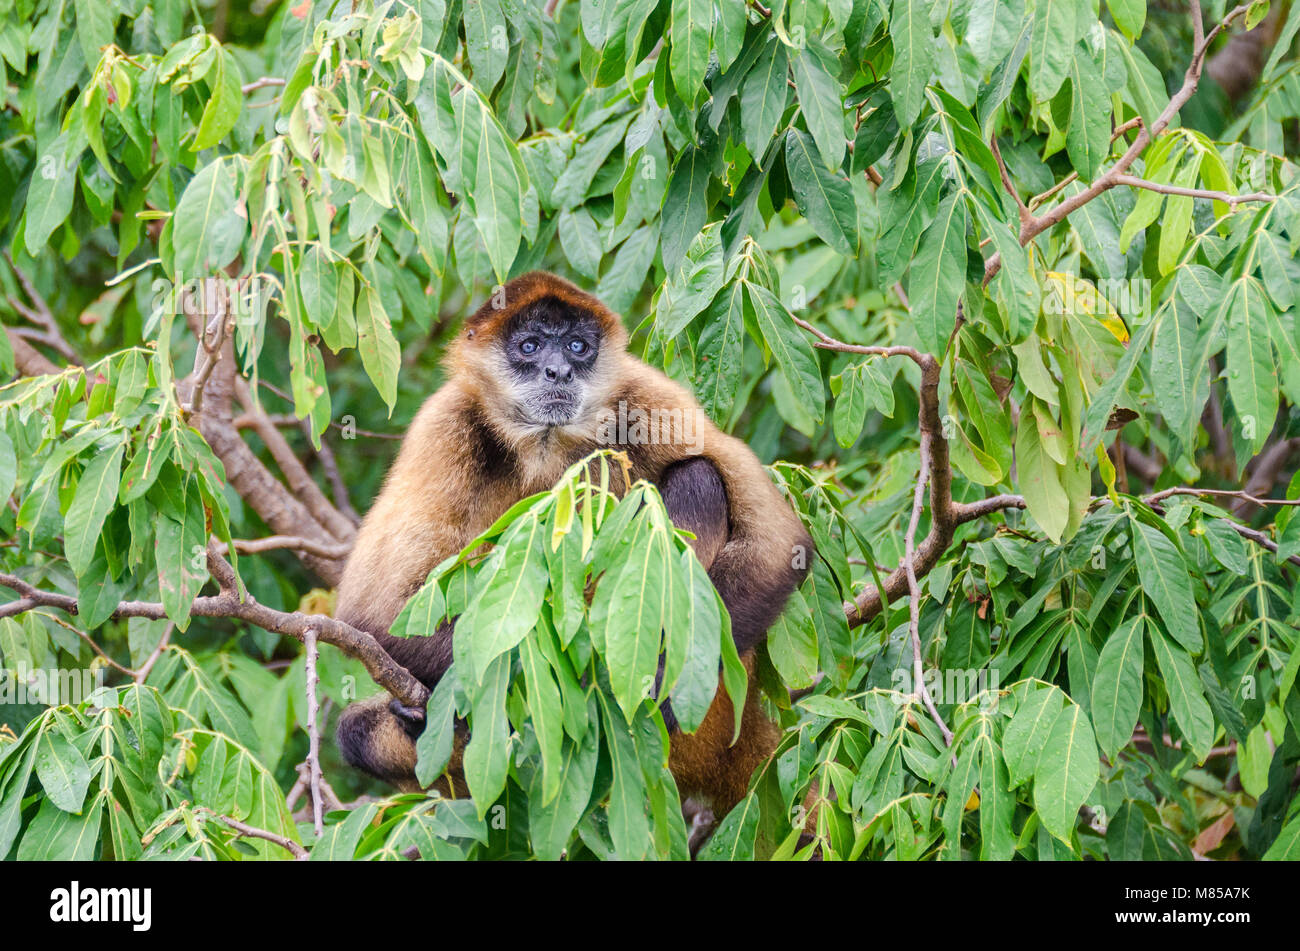 Geoffroy's spider monkey (Ateles geoffroyi ornatus), also known as the black-handed spider monkey, the largest New World monkeys sitting on a tree on  Stock Photo